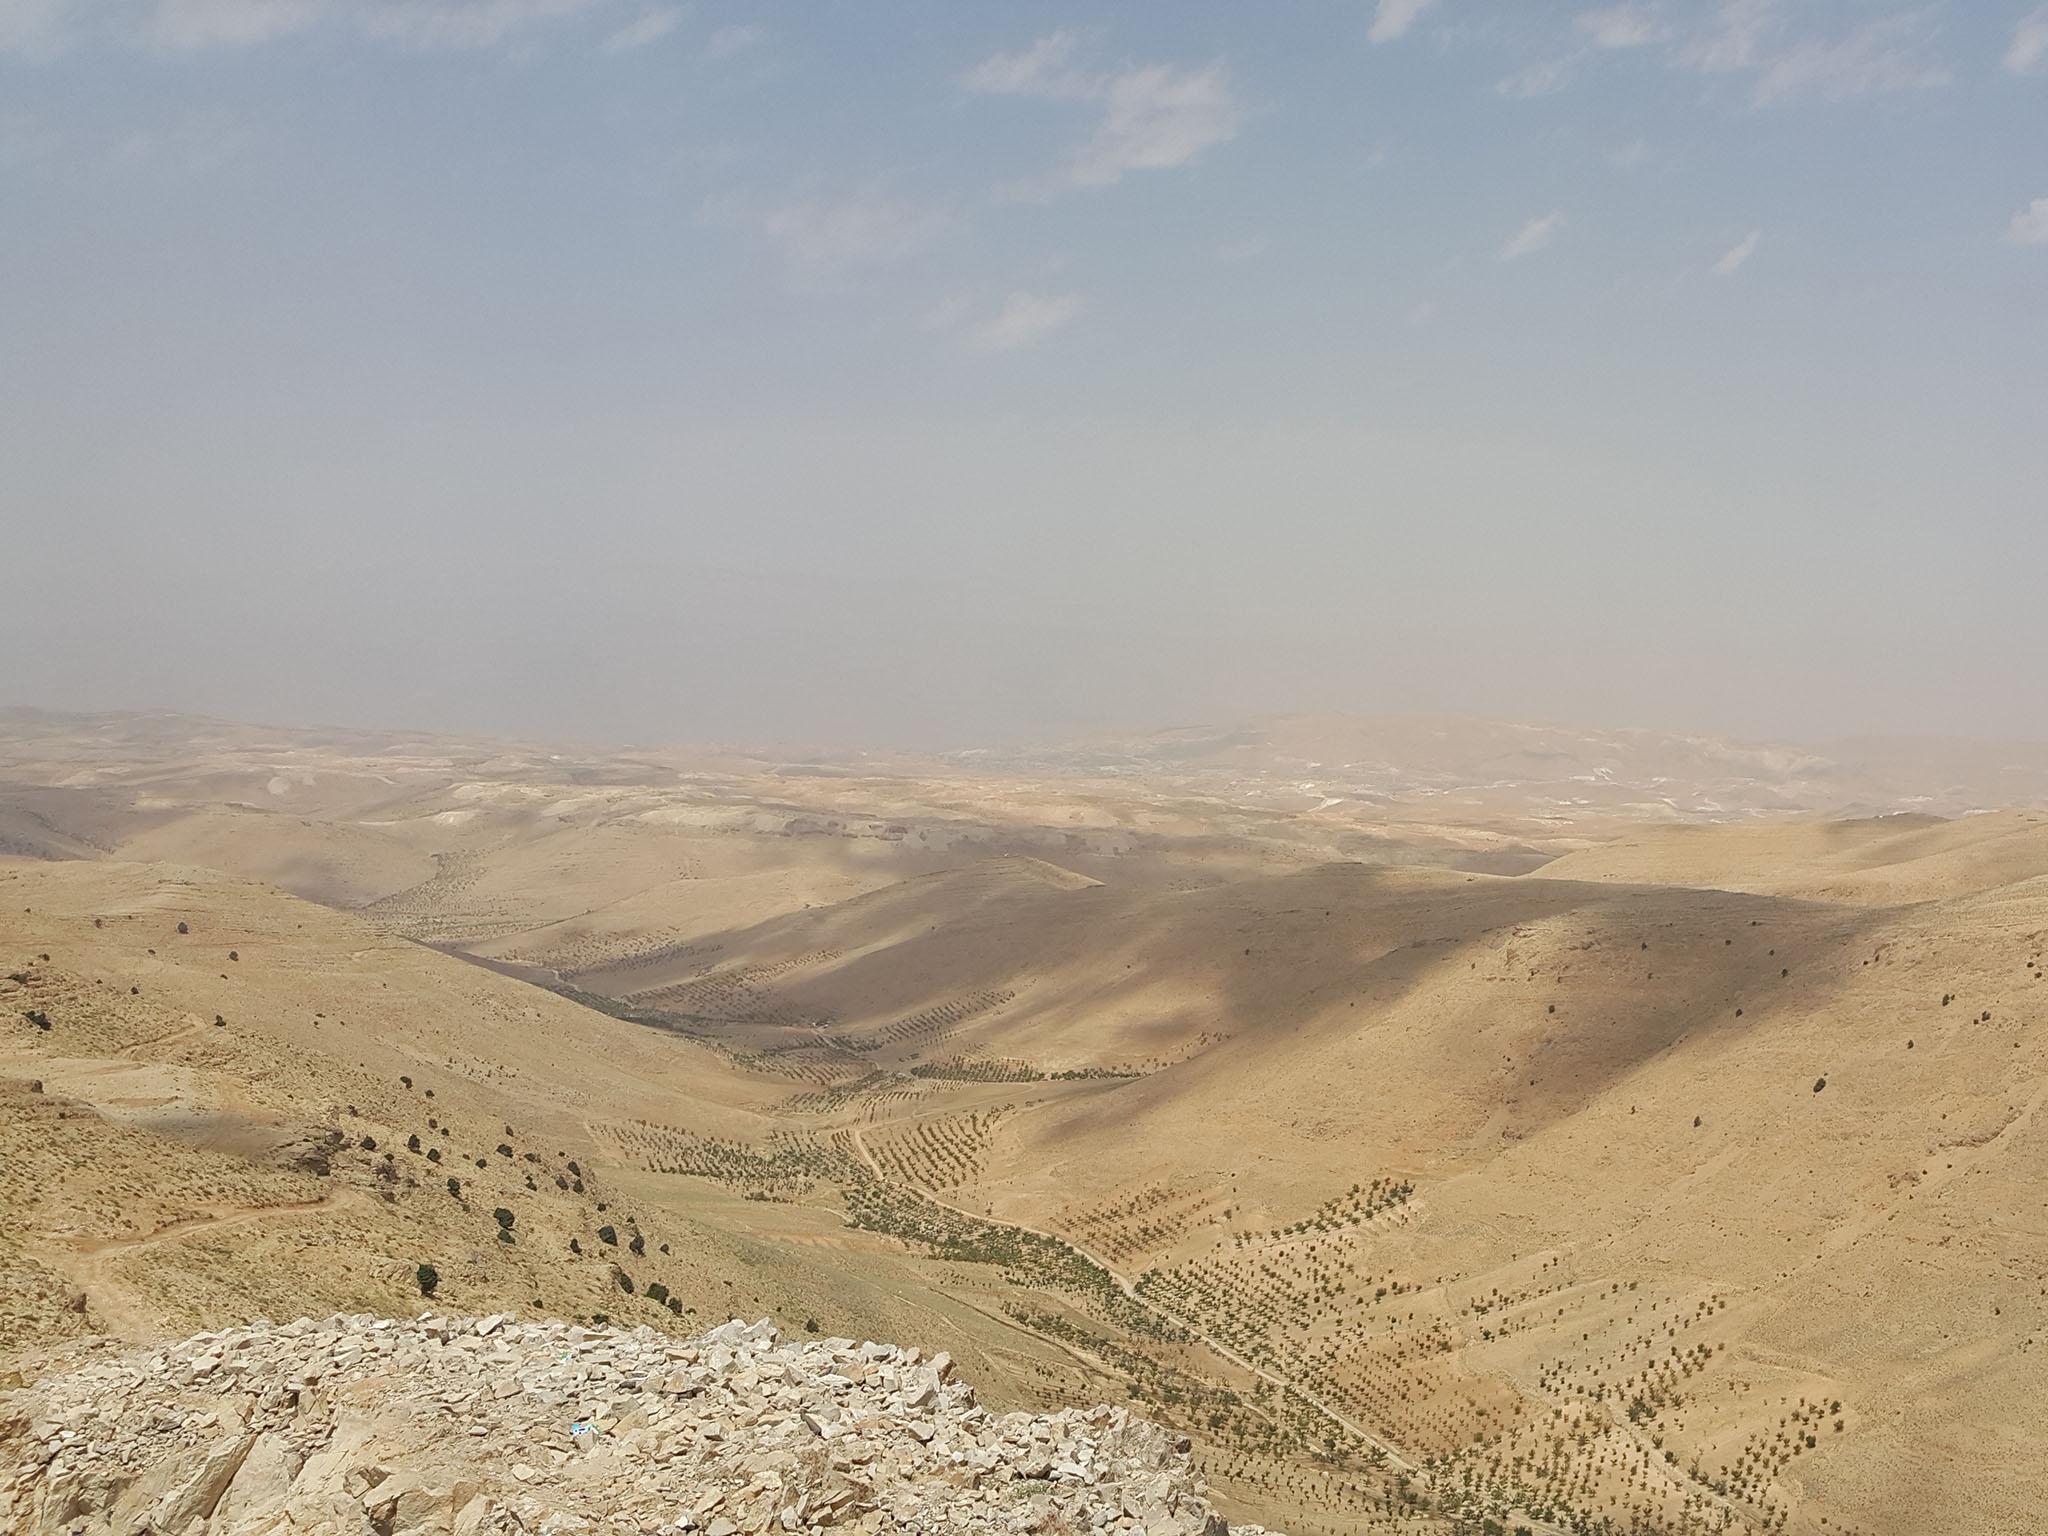 The narrow frontier road in the valley marks the border between Syria (left) and Lebanon (right of the road) in the Qalamoun battlefield